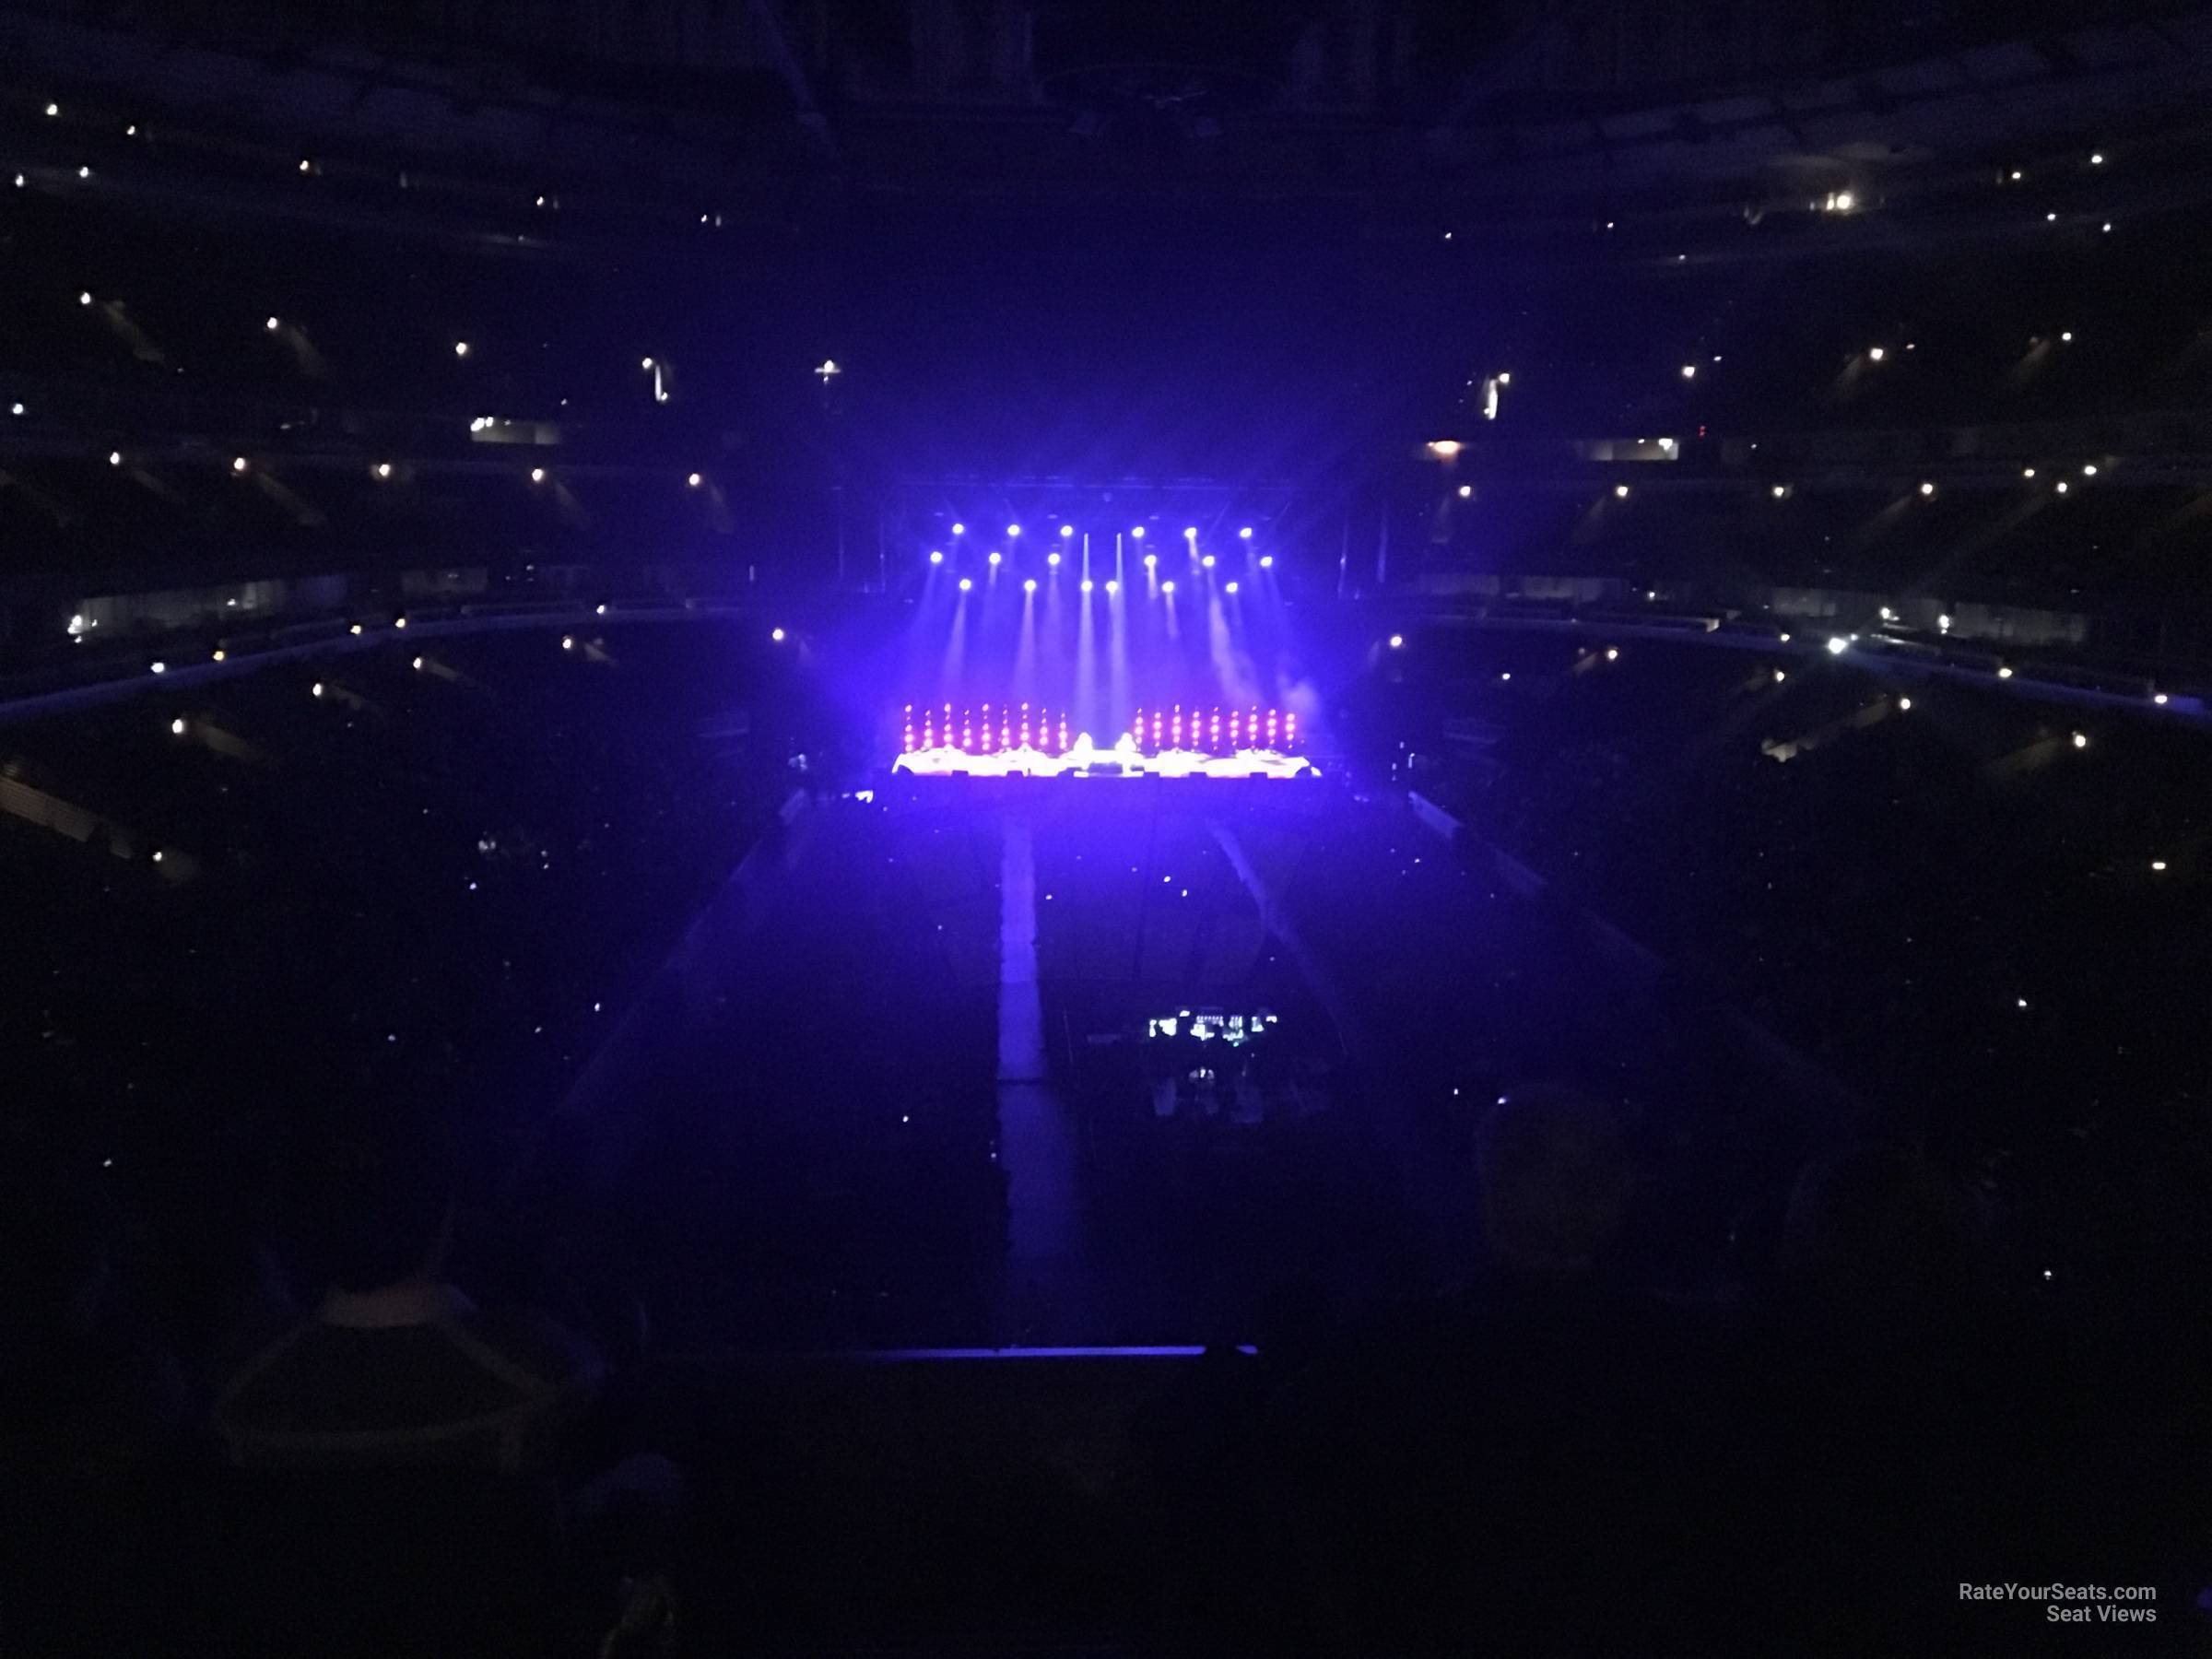 section 209, row 4 seat view  for concert - united center